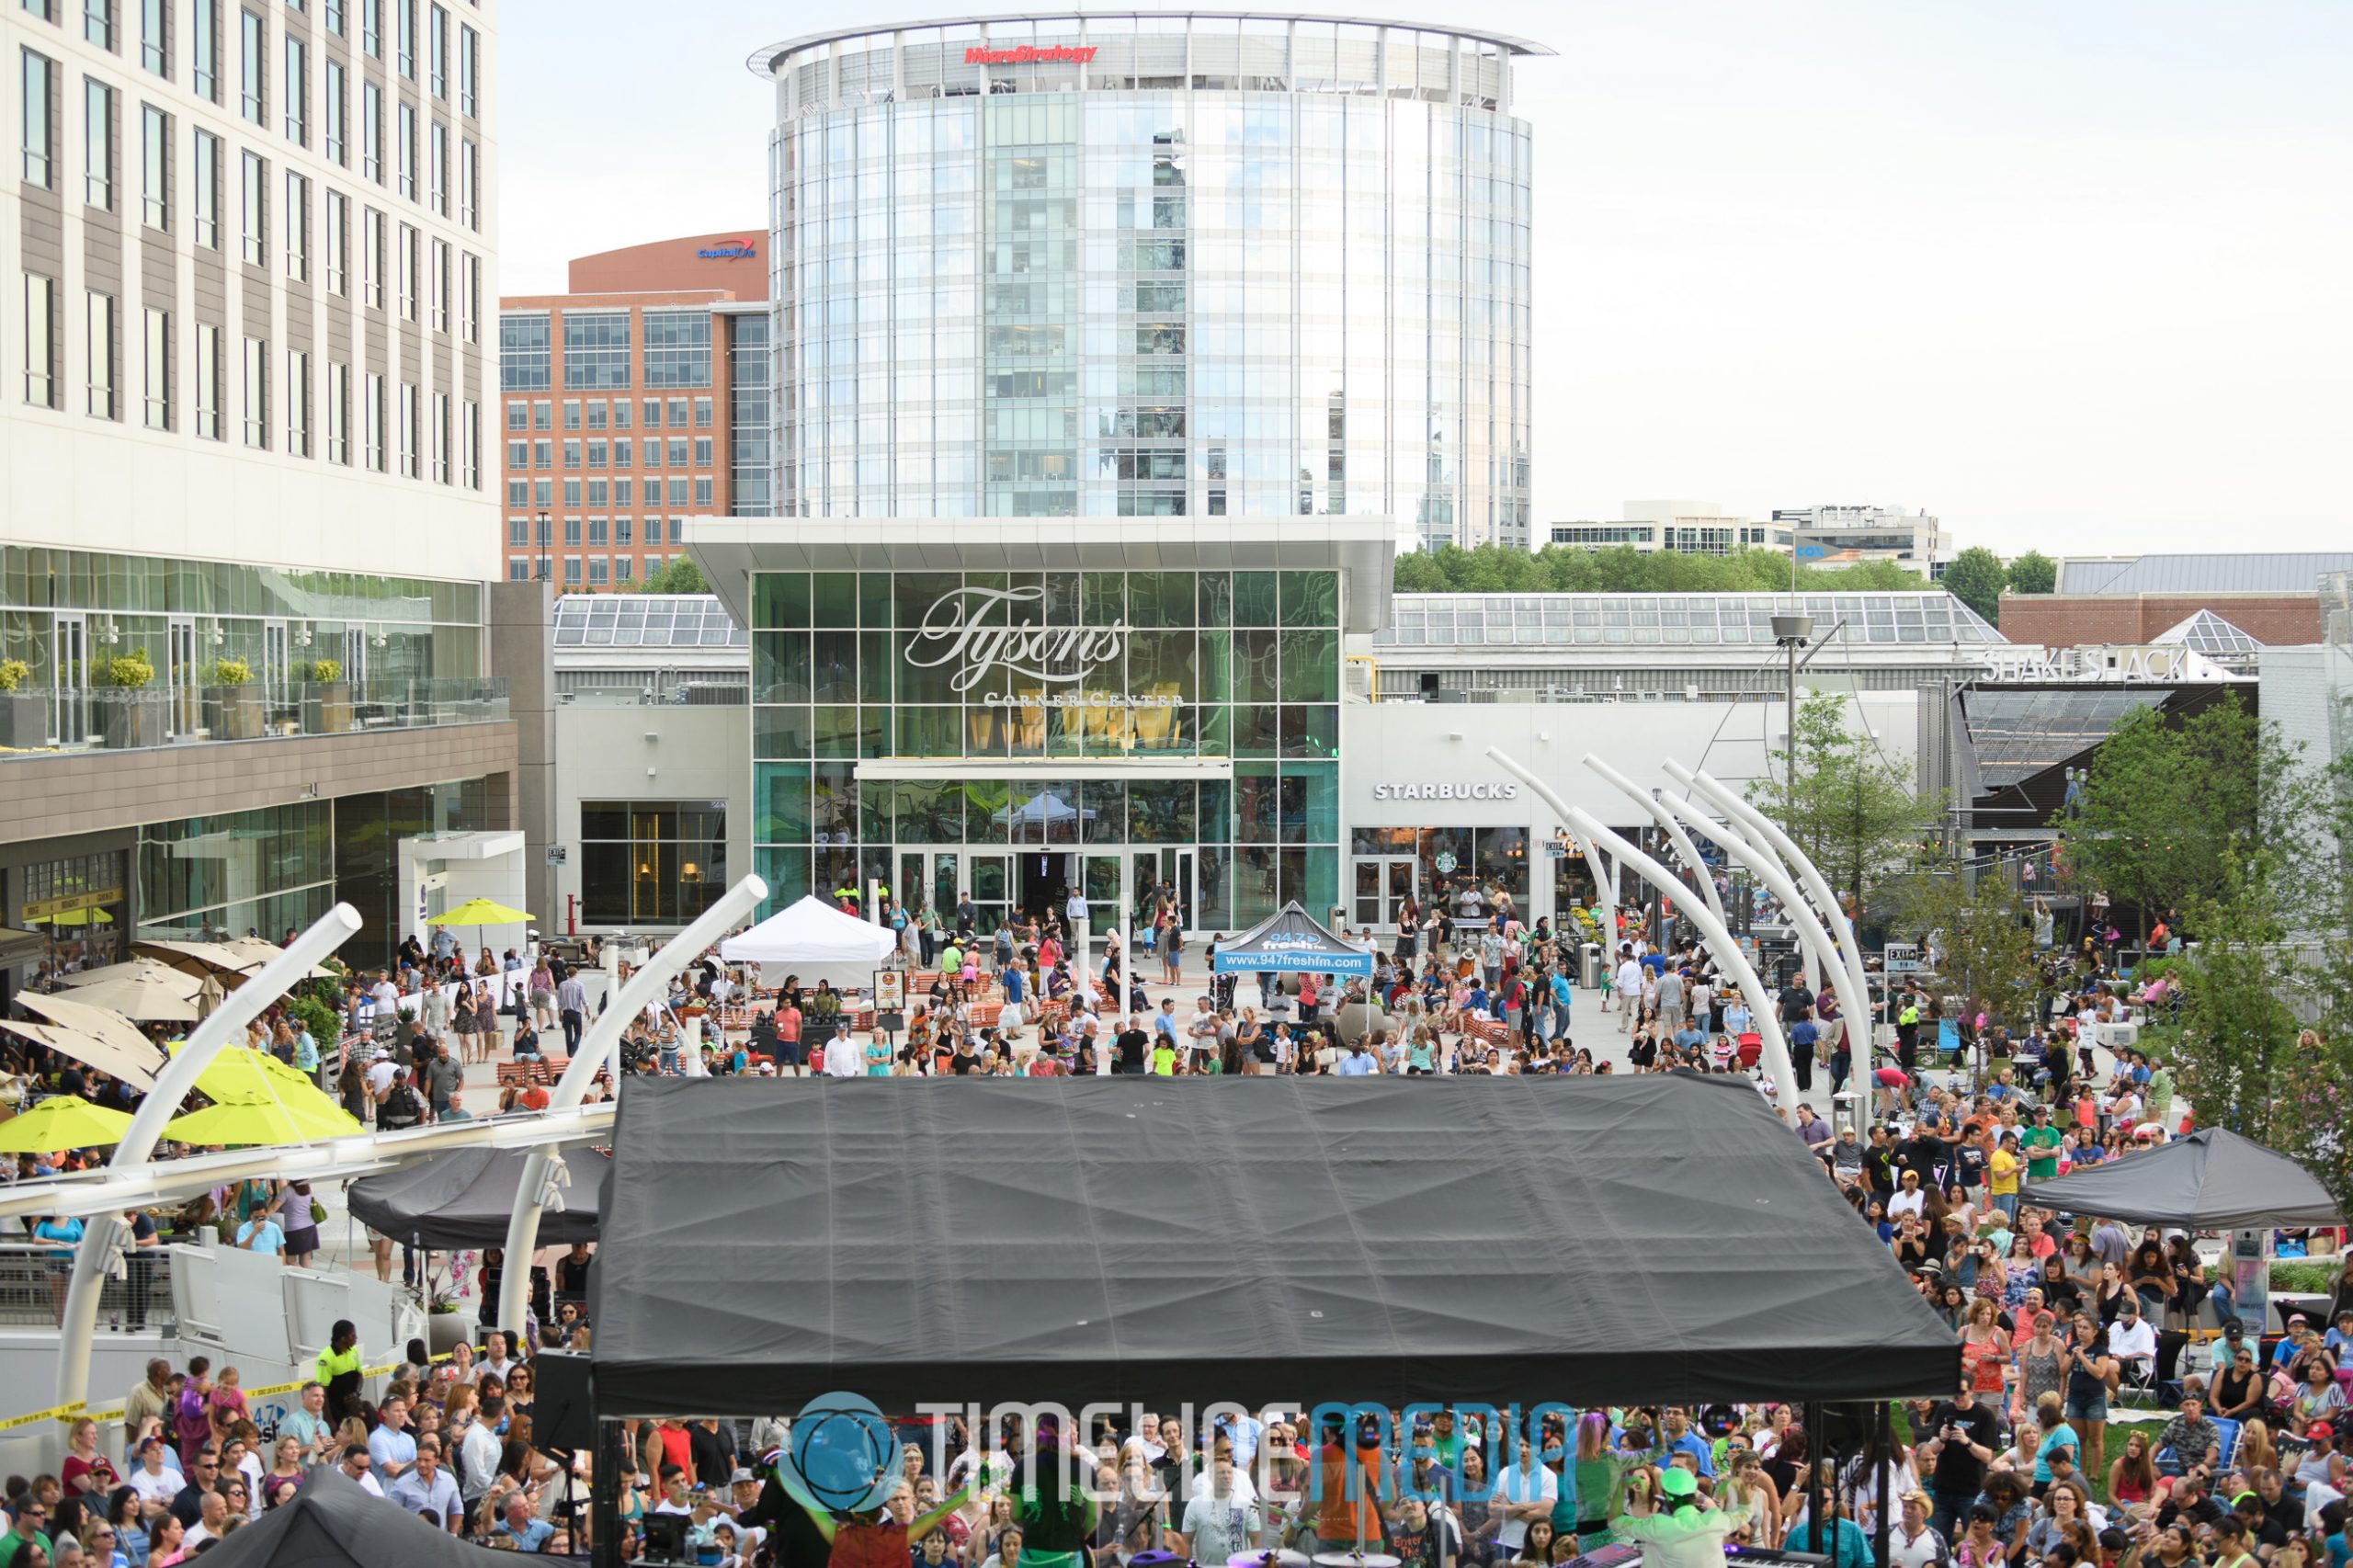 The Legwarmers perform at the 2016 June Concerts - Tysons Corner Center Summer Concert Series